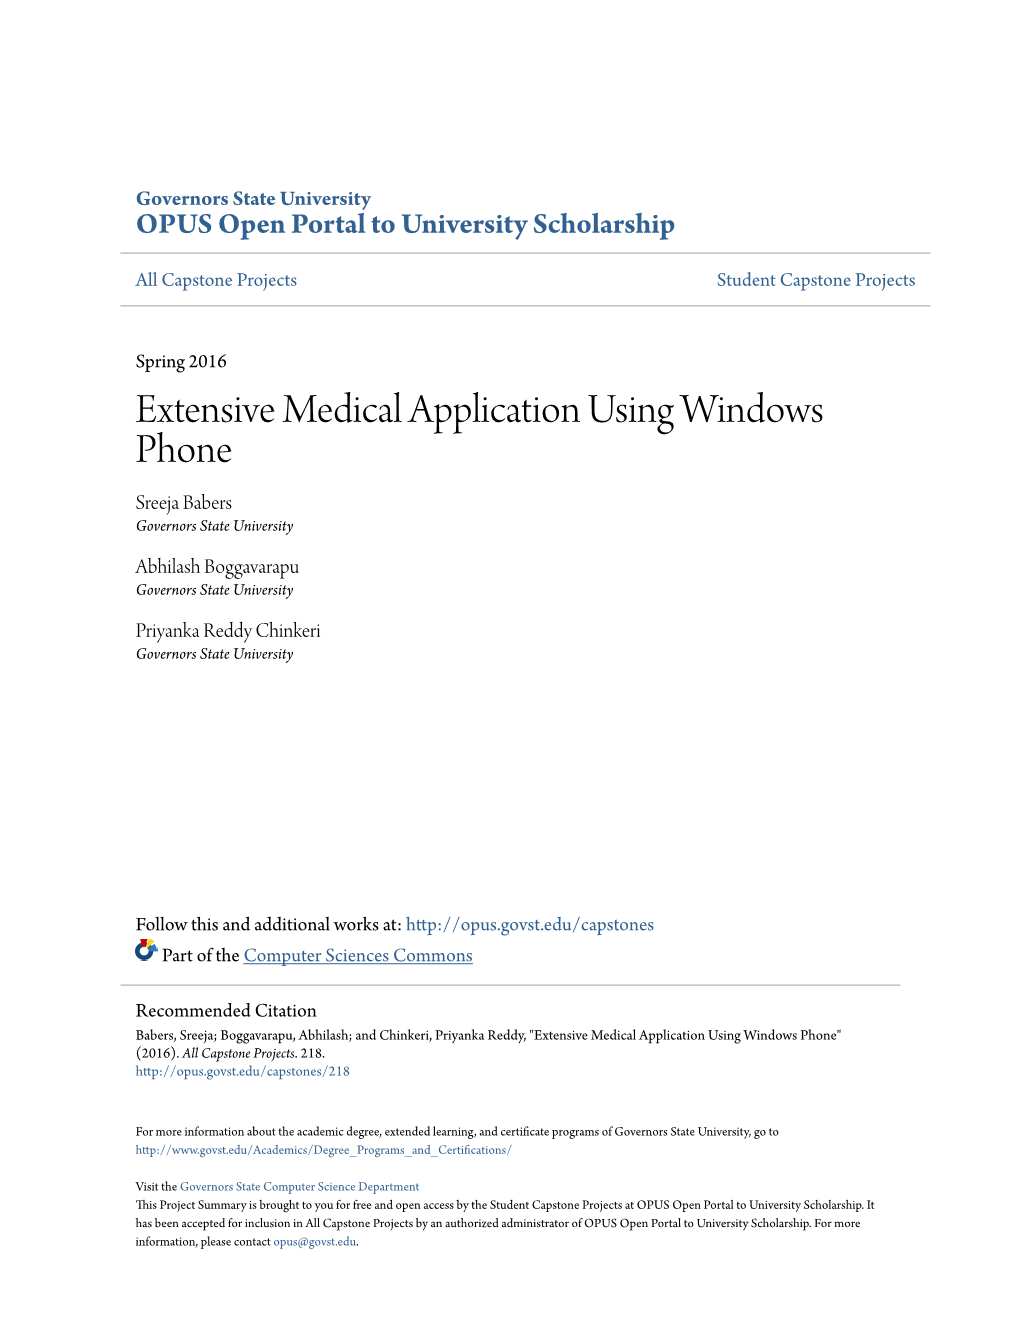 Extensive Medical Application Using Windows Phone Sreeja Babers Governors State University